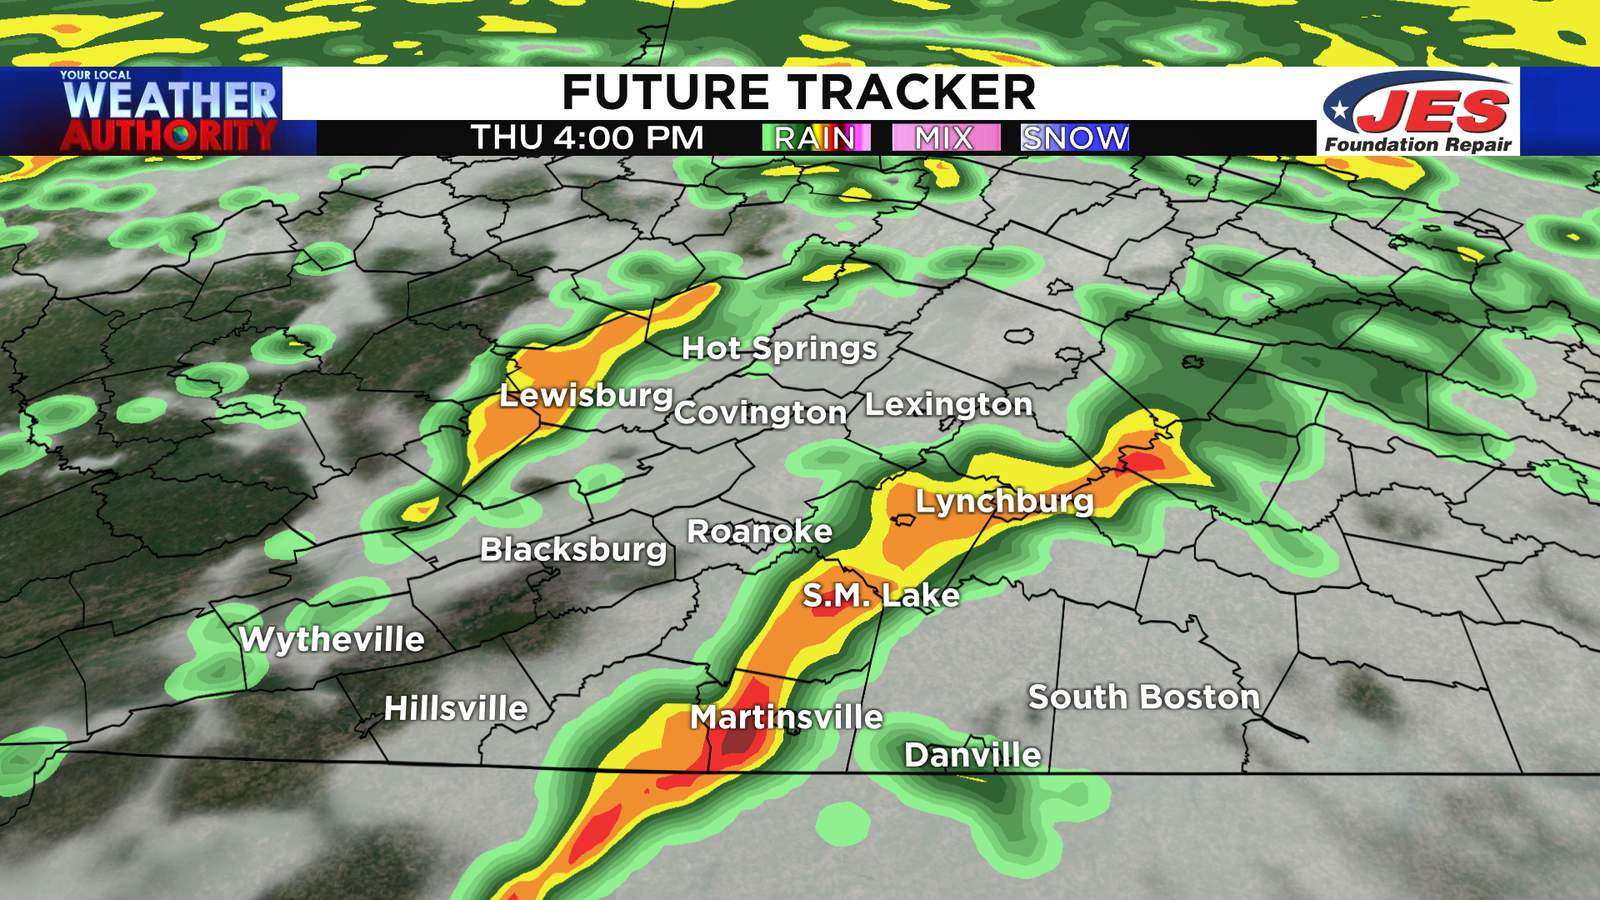 Stay alert! Rain likely, few strong-to-severe storms possible through Thursday afternoon